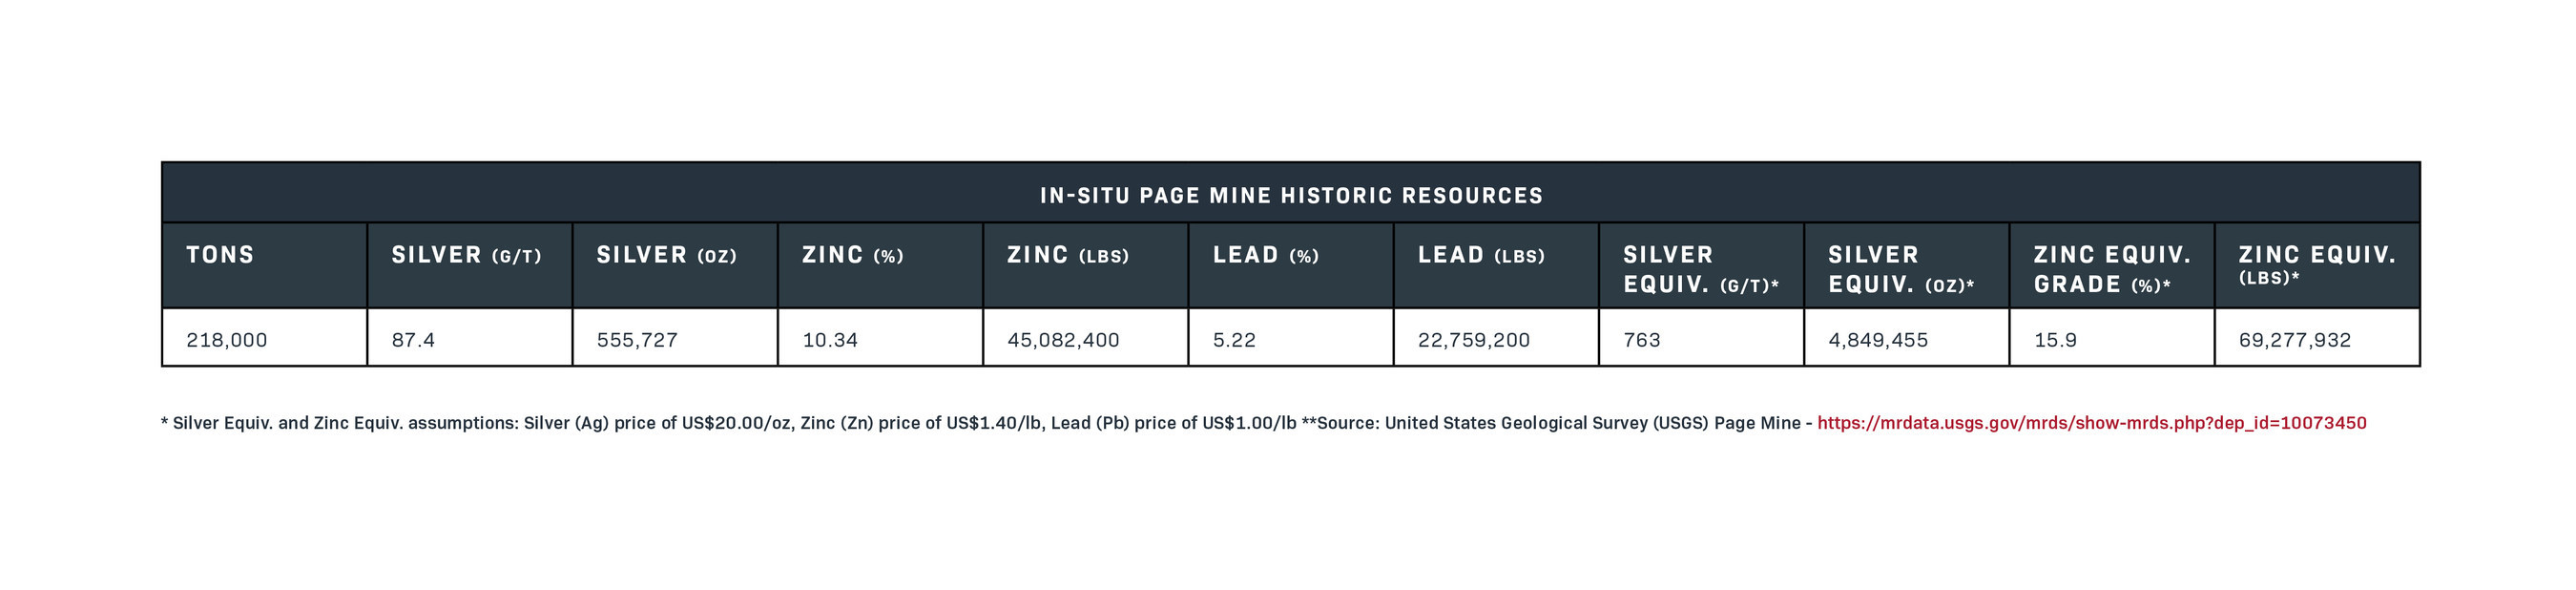 Page Mine Historic Resources (CNW Group/Silver Valley Metals Corp.)